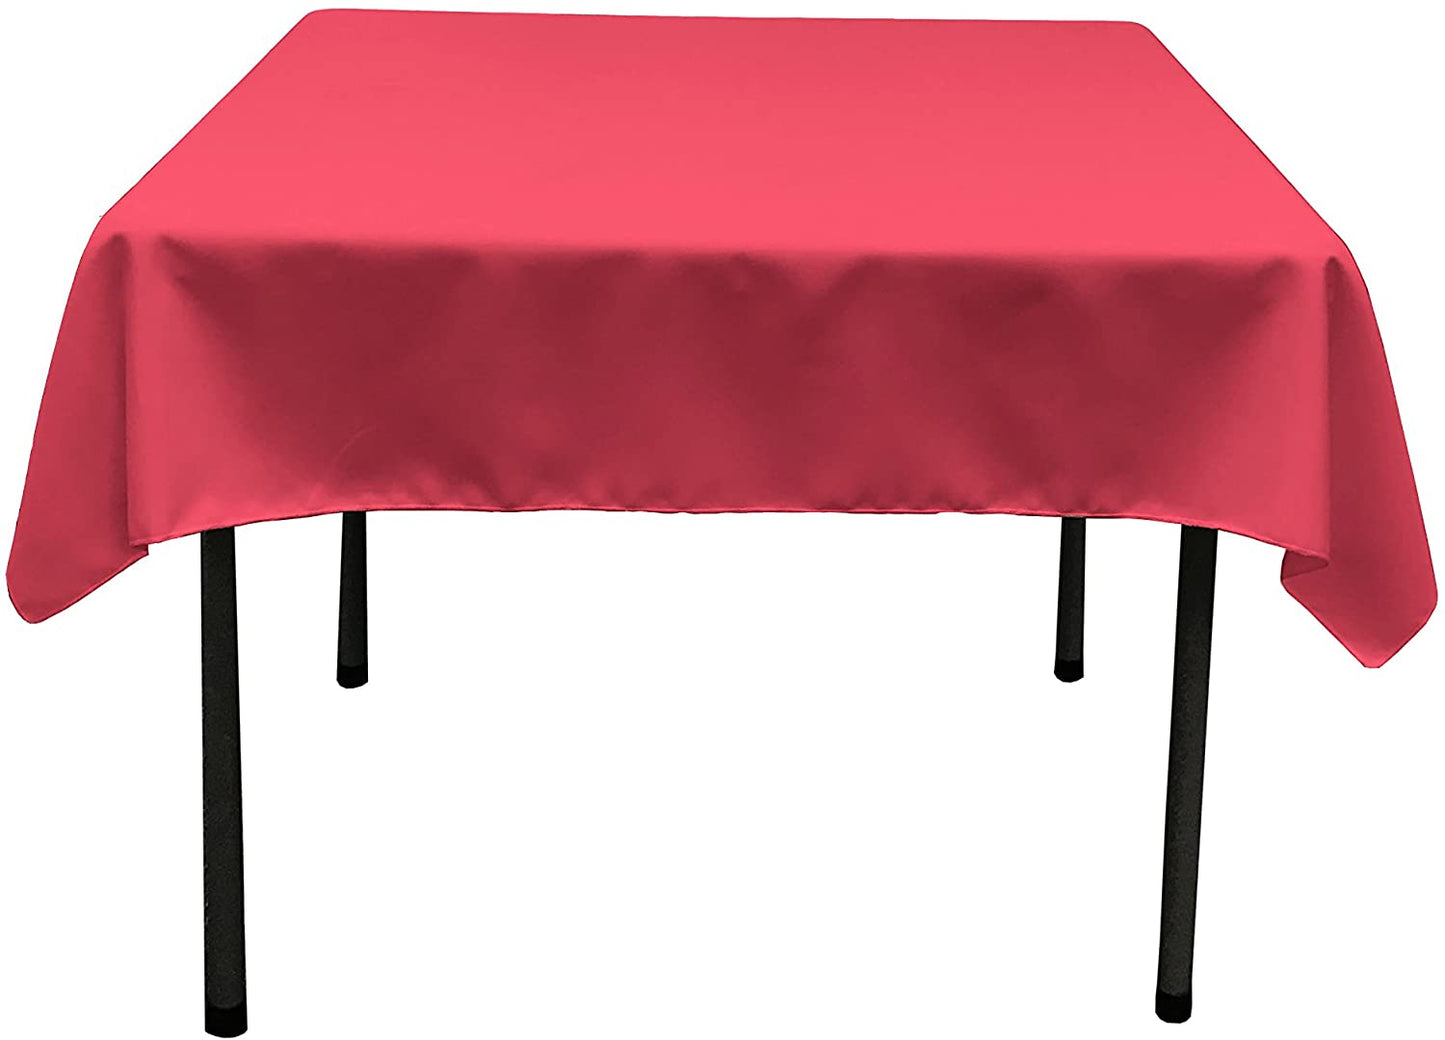 Polyester Poplin Washable Square Tablecloth, Stain and Wrinkle Resistant Table Cover Fuchsia